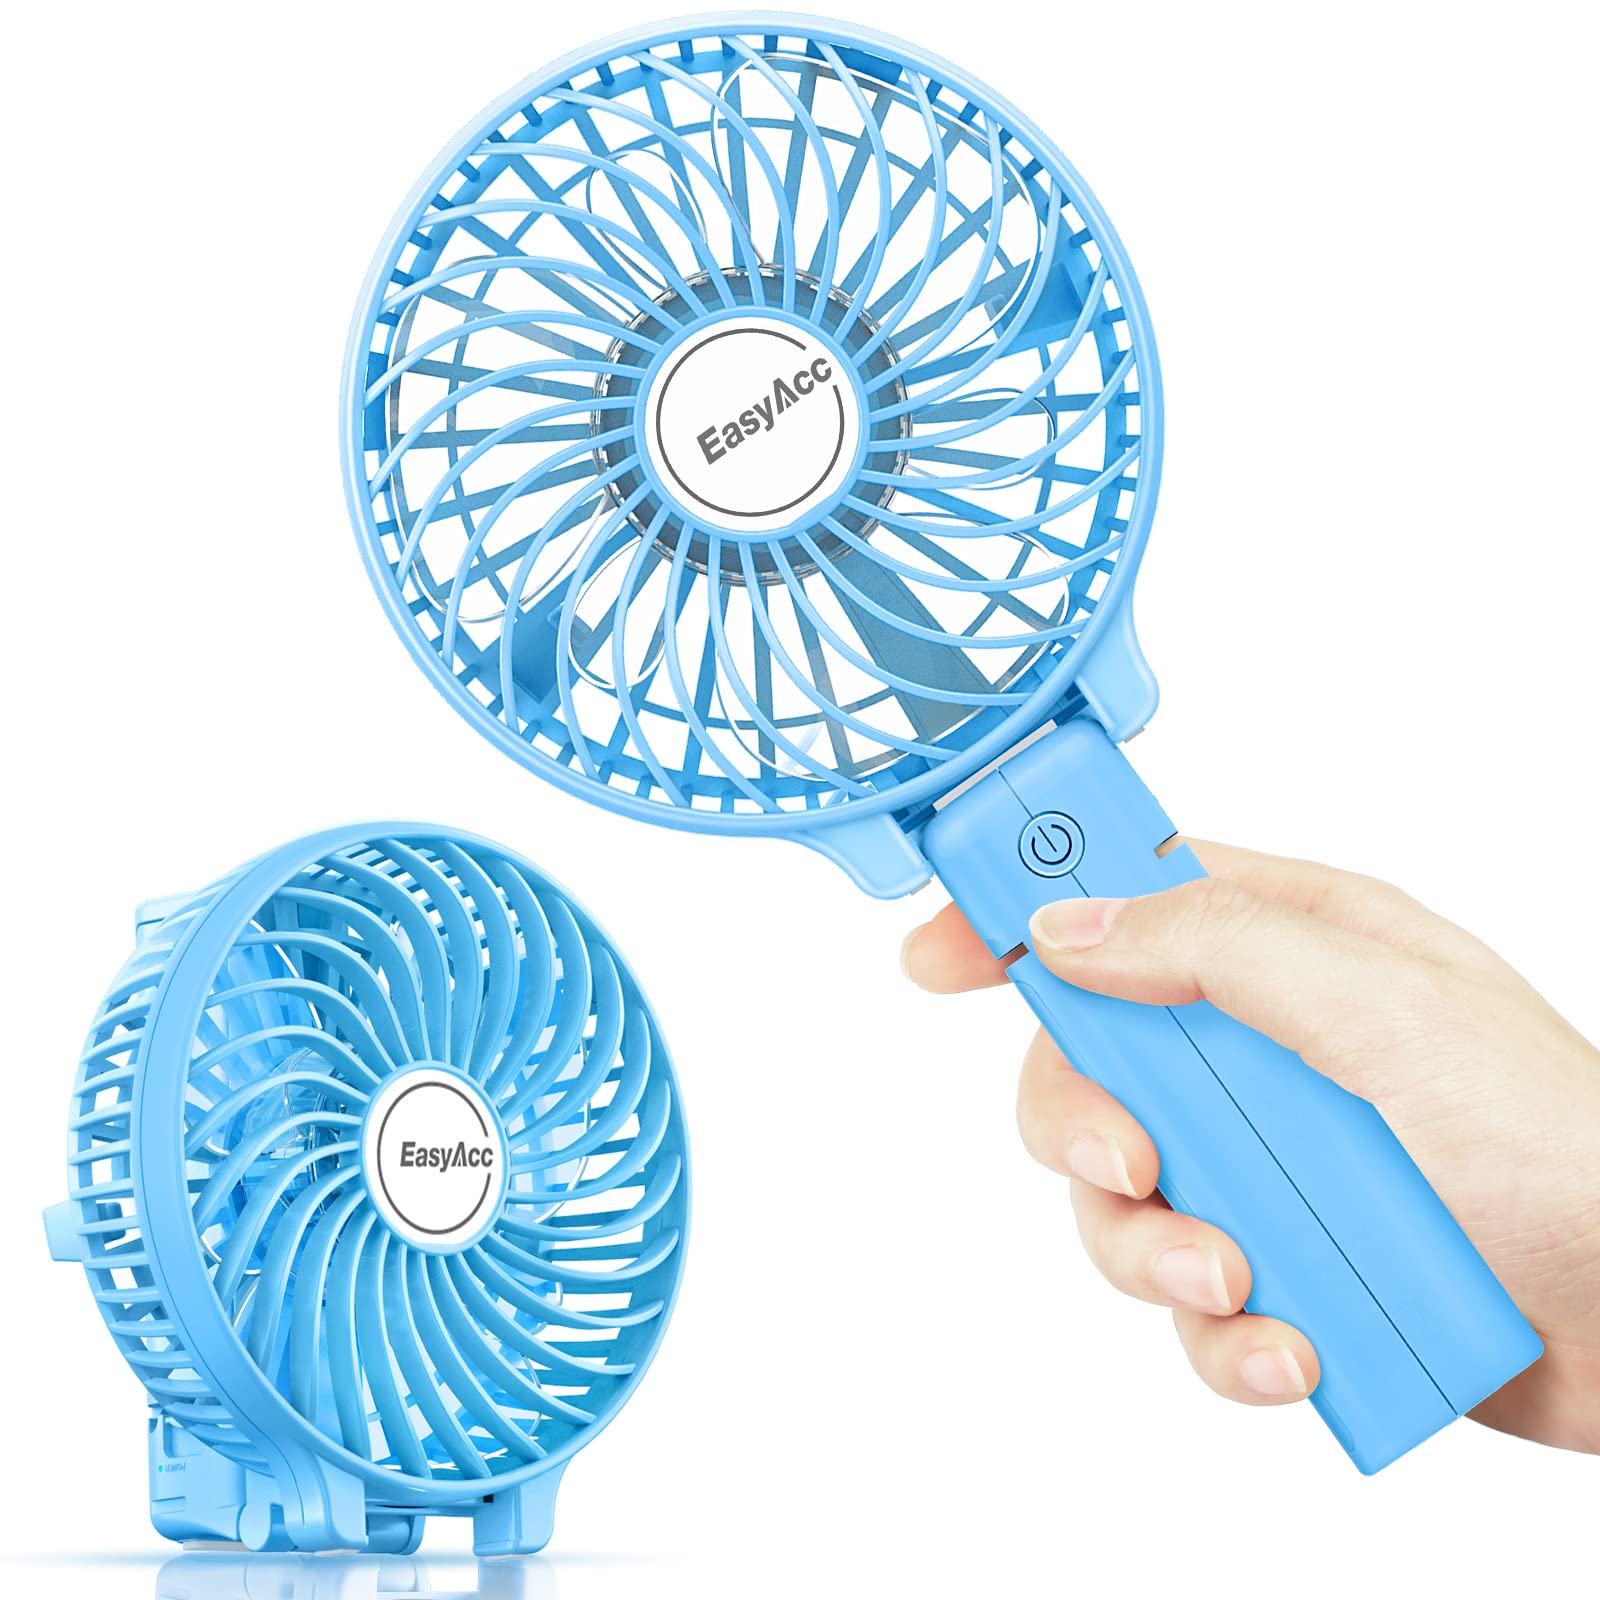 EasyAcc Mini Handheld Fan, USB Desk Fan Small Personal Portable Stroller Table Fan with Rechargeable Battery Operated Cooling Folding Electric Fan 3-10H Working Hours for Travel Office Outdoor